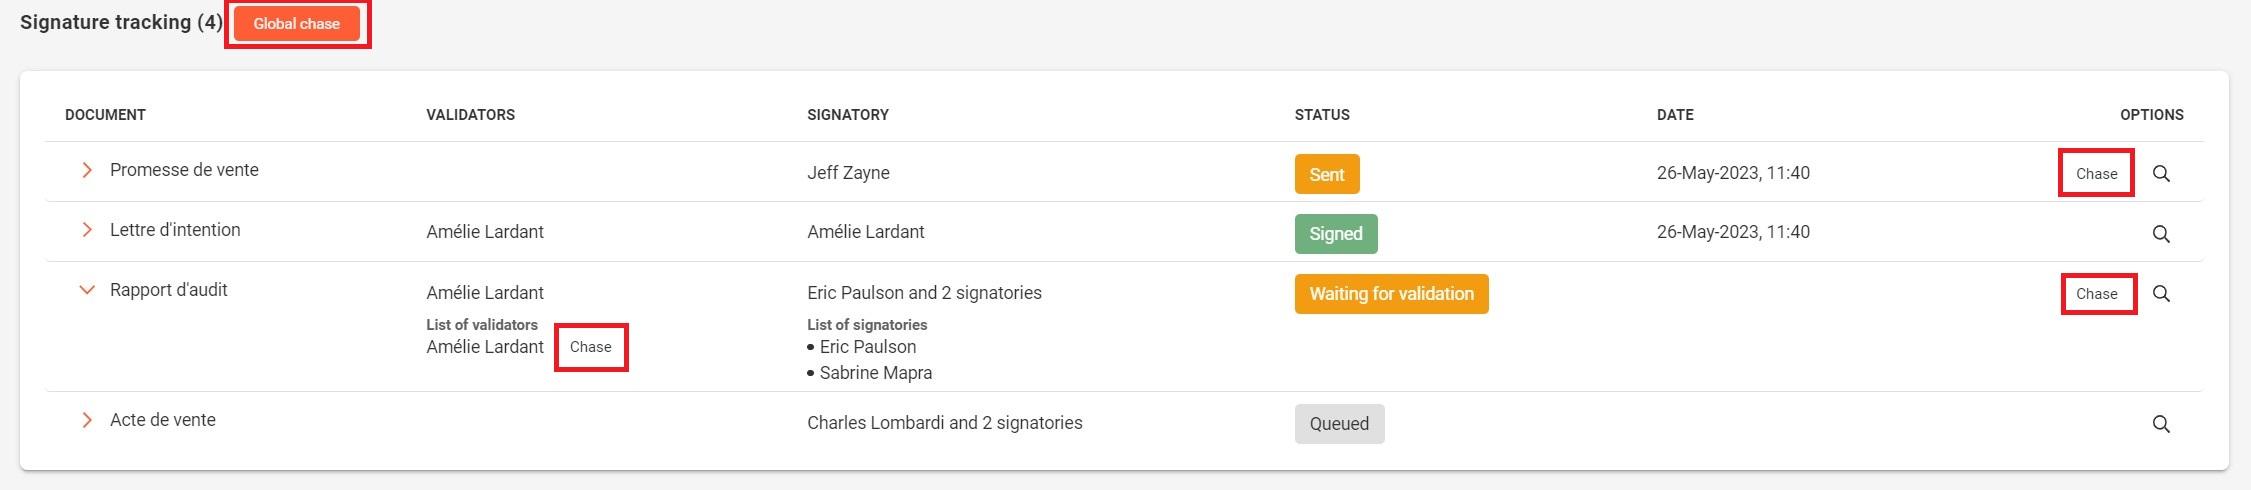 chase signatories and validators new feature closd